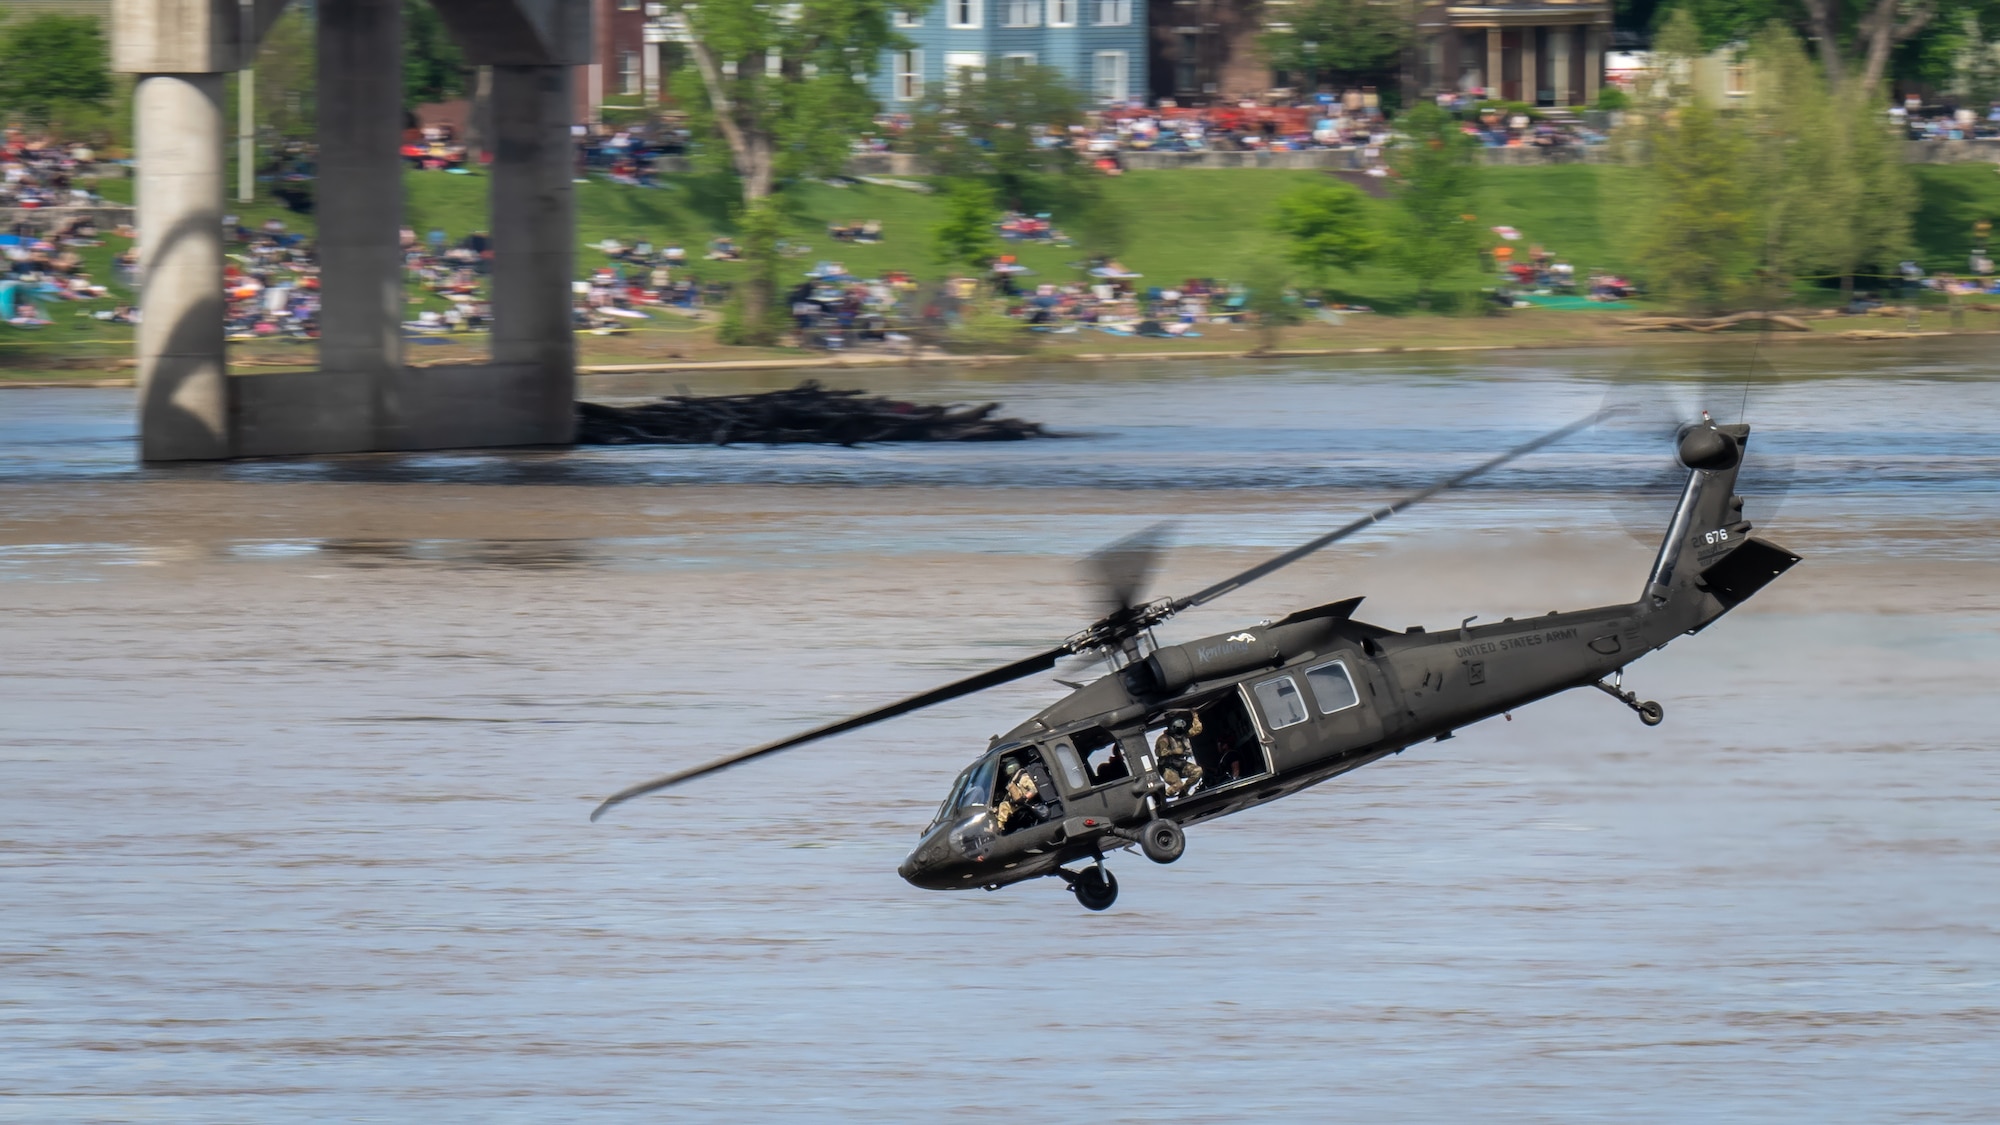 A UH-60 Black Hawk helicopter assigned to the Kentucky Army National Guard’s 63rd Theater Aviation Brigade performs an aerial demonstration during the Thunder Over Louisville air show in Louisville, Ky., April 20, 2024. This year’s event featured more than two-dozen military and civilian planes, including the Kentucky Air National Guard’s C130J Super Hercules. (U.S. Air National Guard photo by Dale Greer)